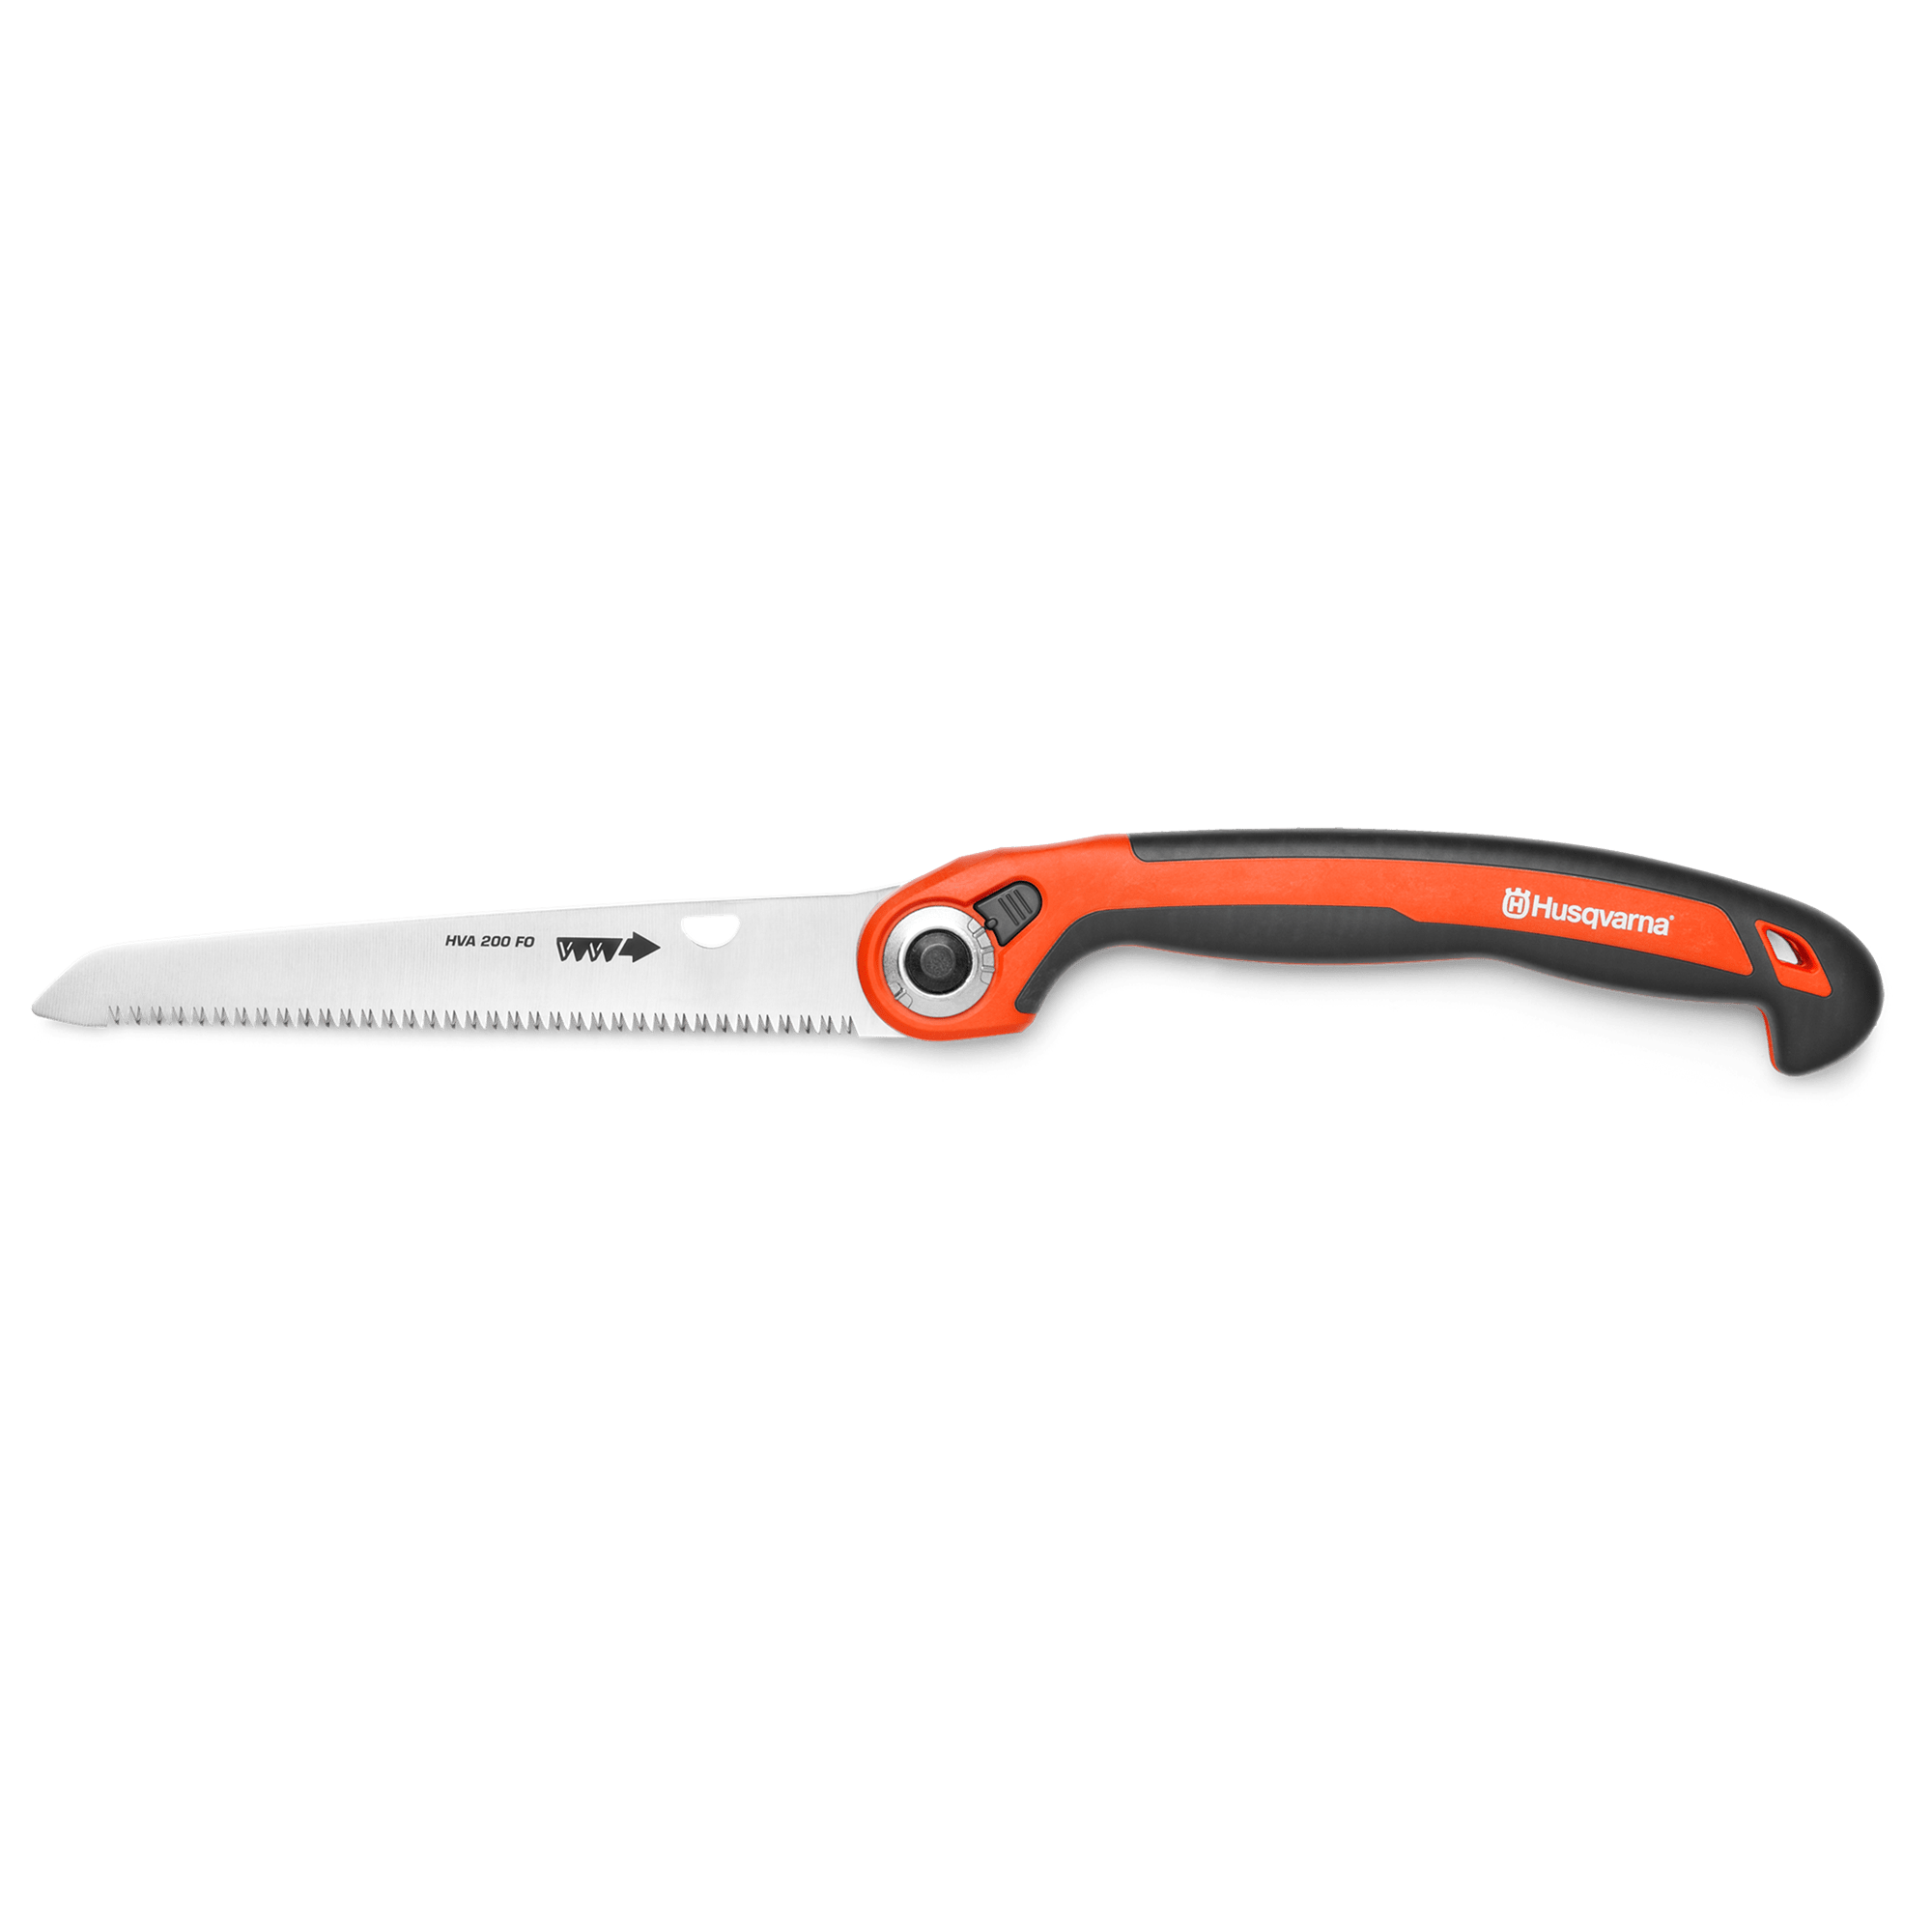 Image for 200FO Folding Pruning Saw                                                                                                        from HusqvarnaB2C